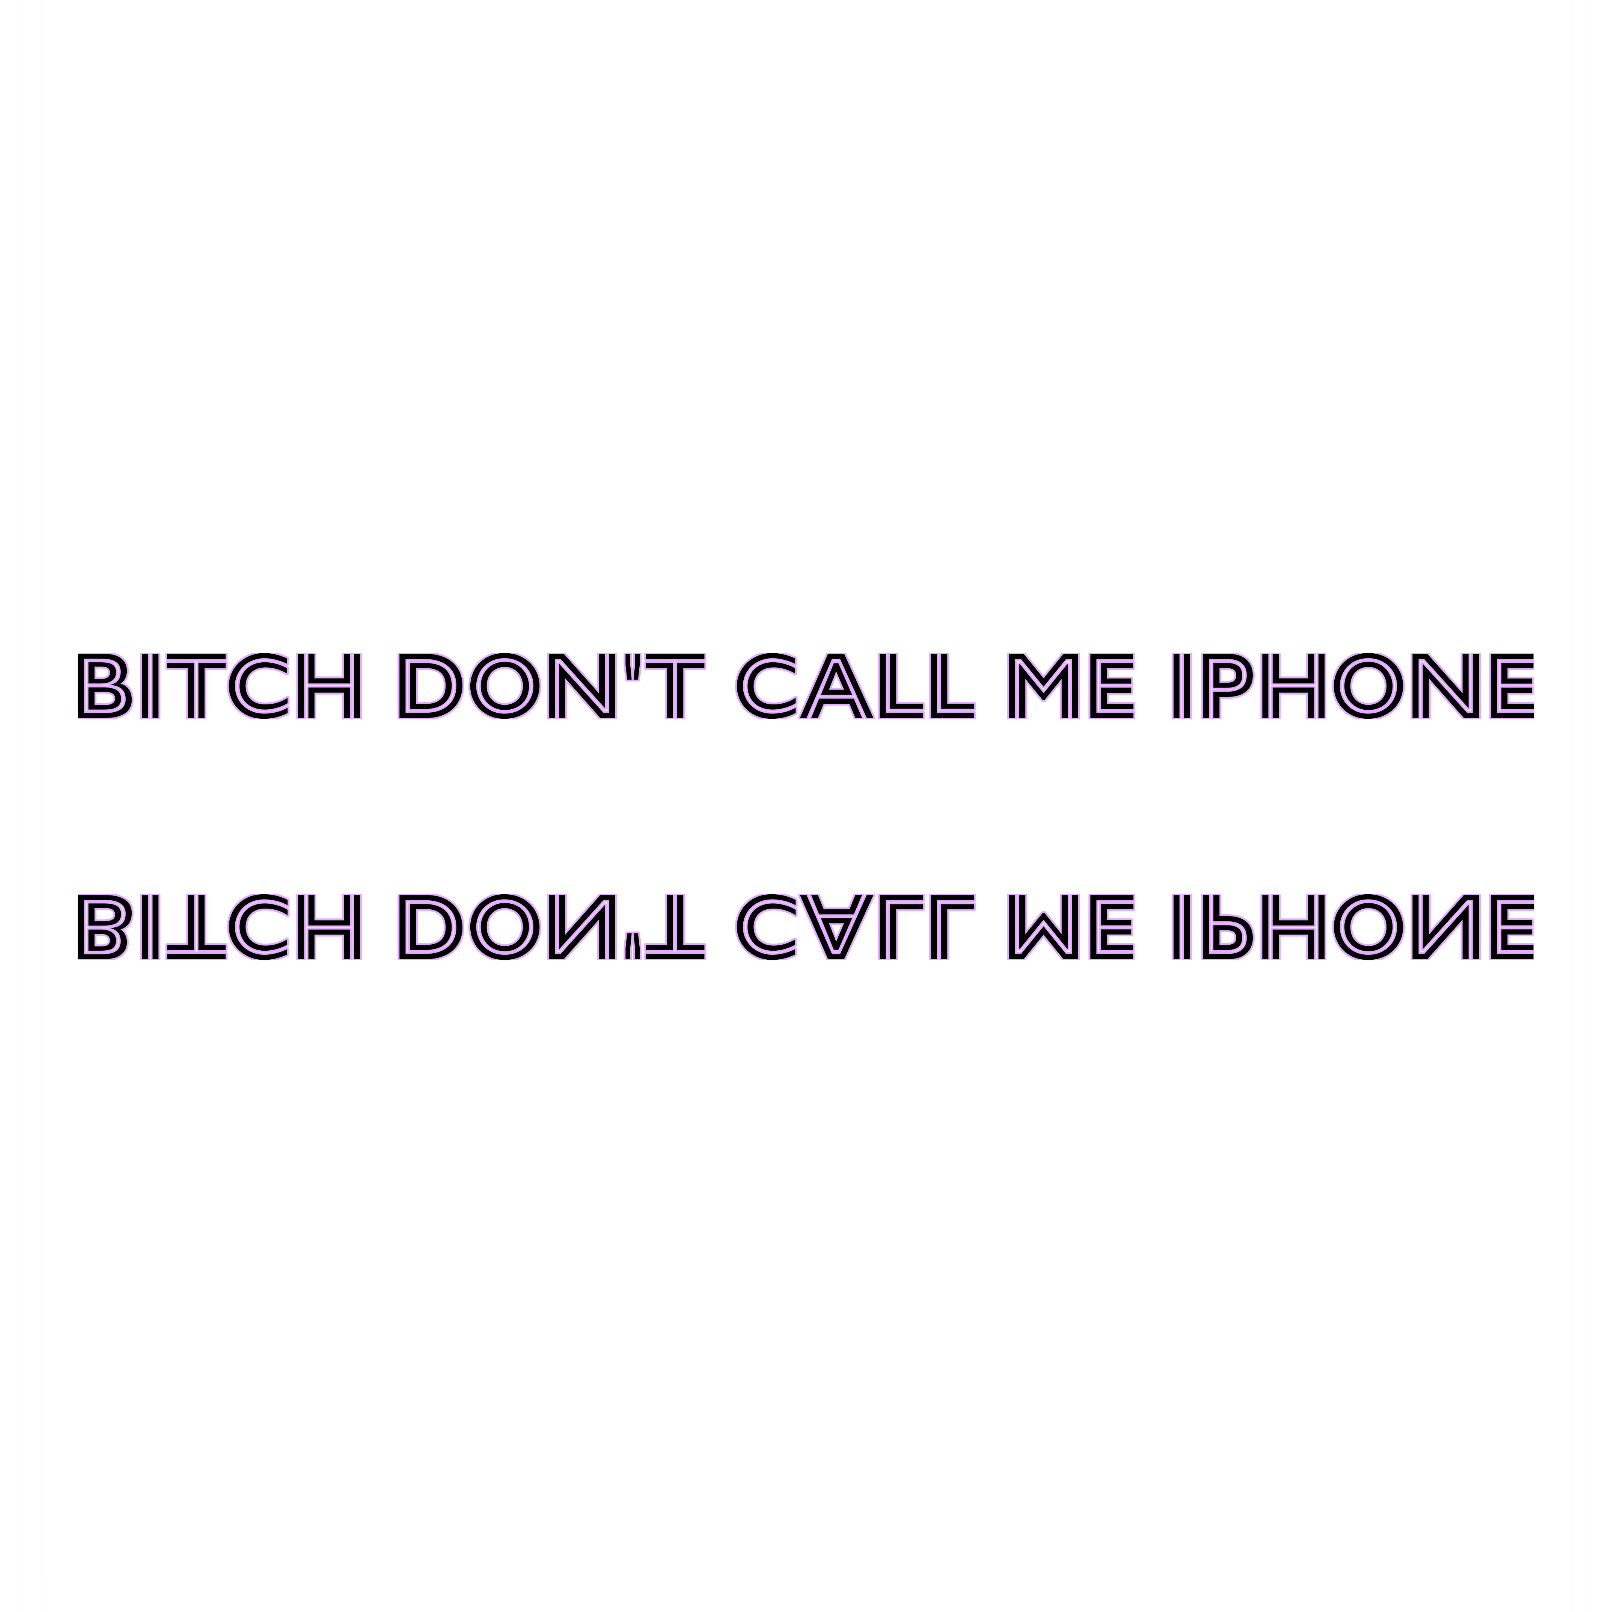 Don' t Call Me IPHONE remix